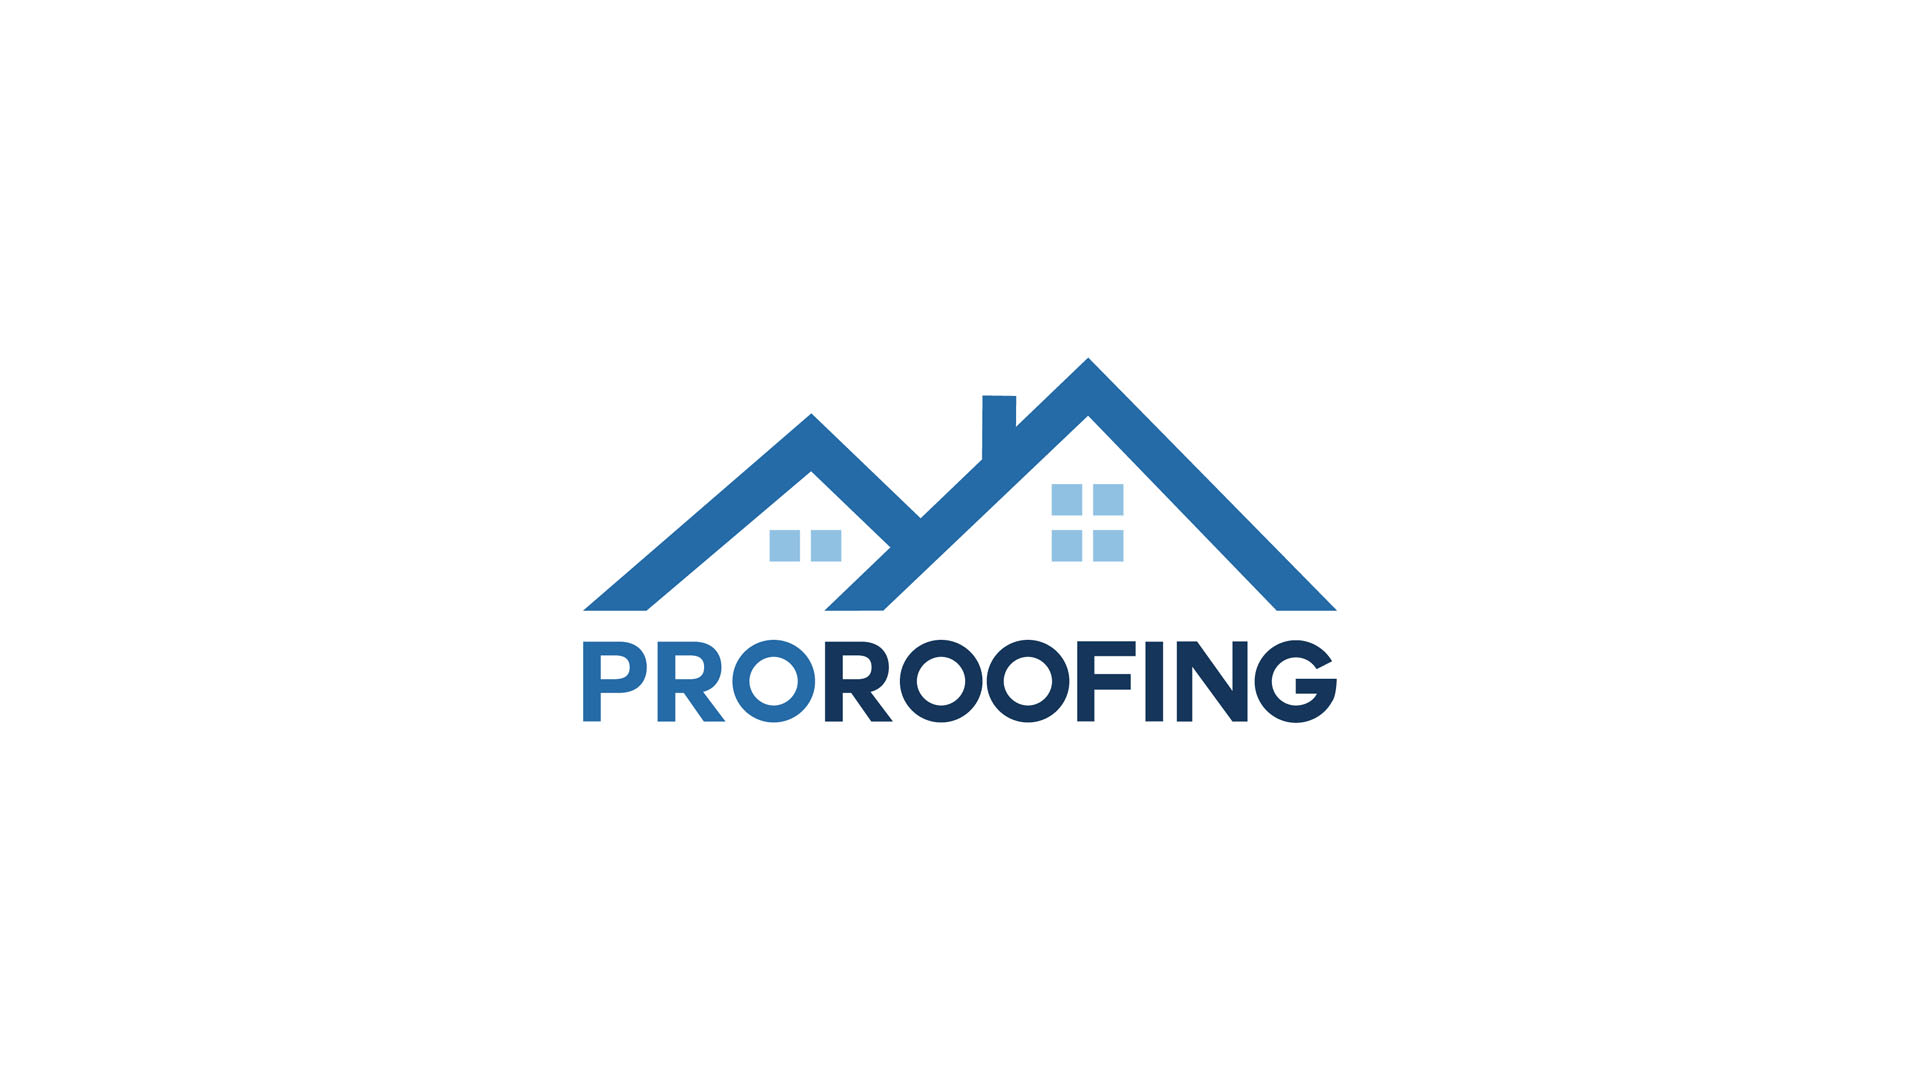 Pro Roofing - Logo Image - New Minds Group